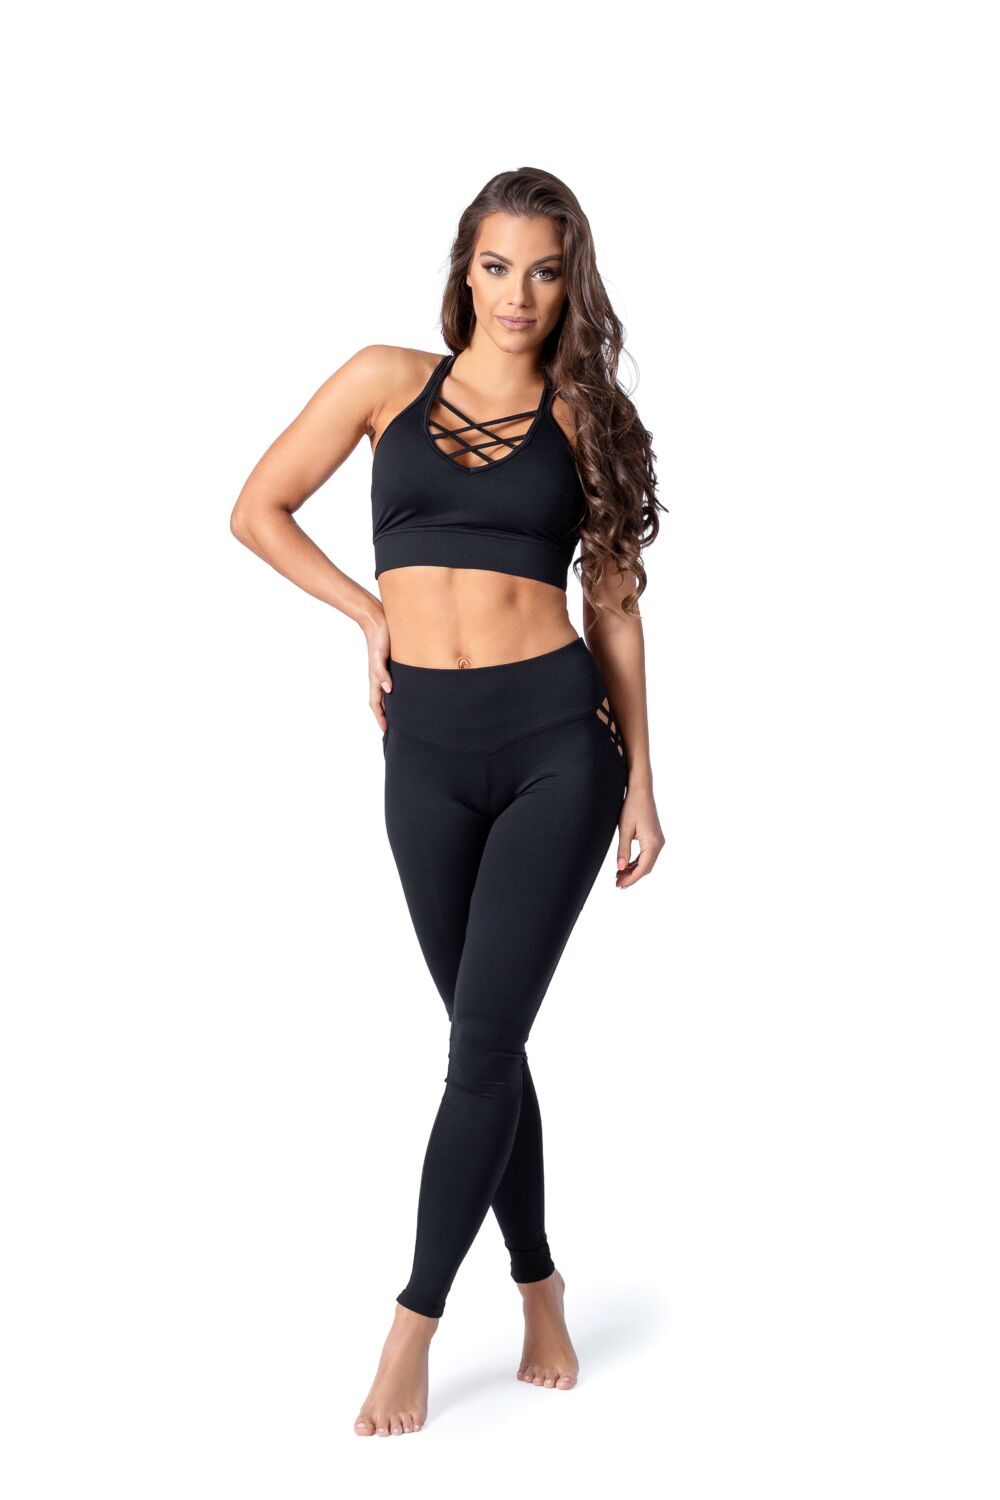 Indigostyle fitness top – Cross